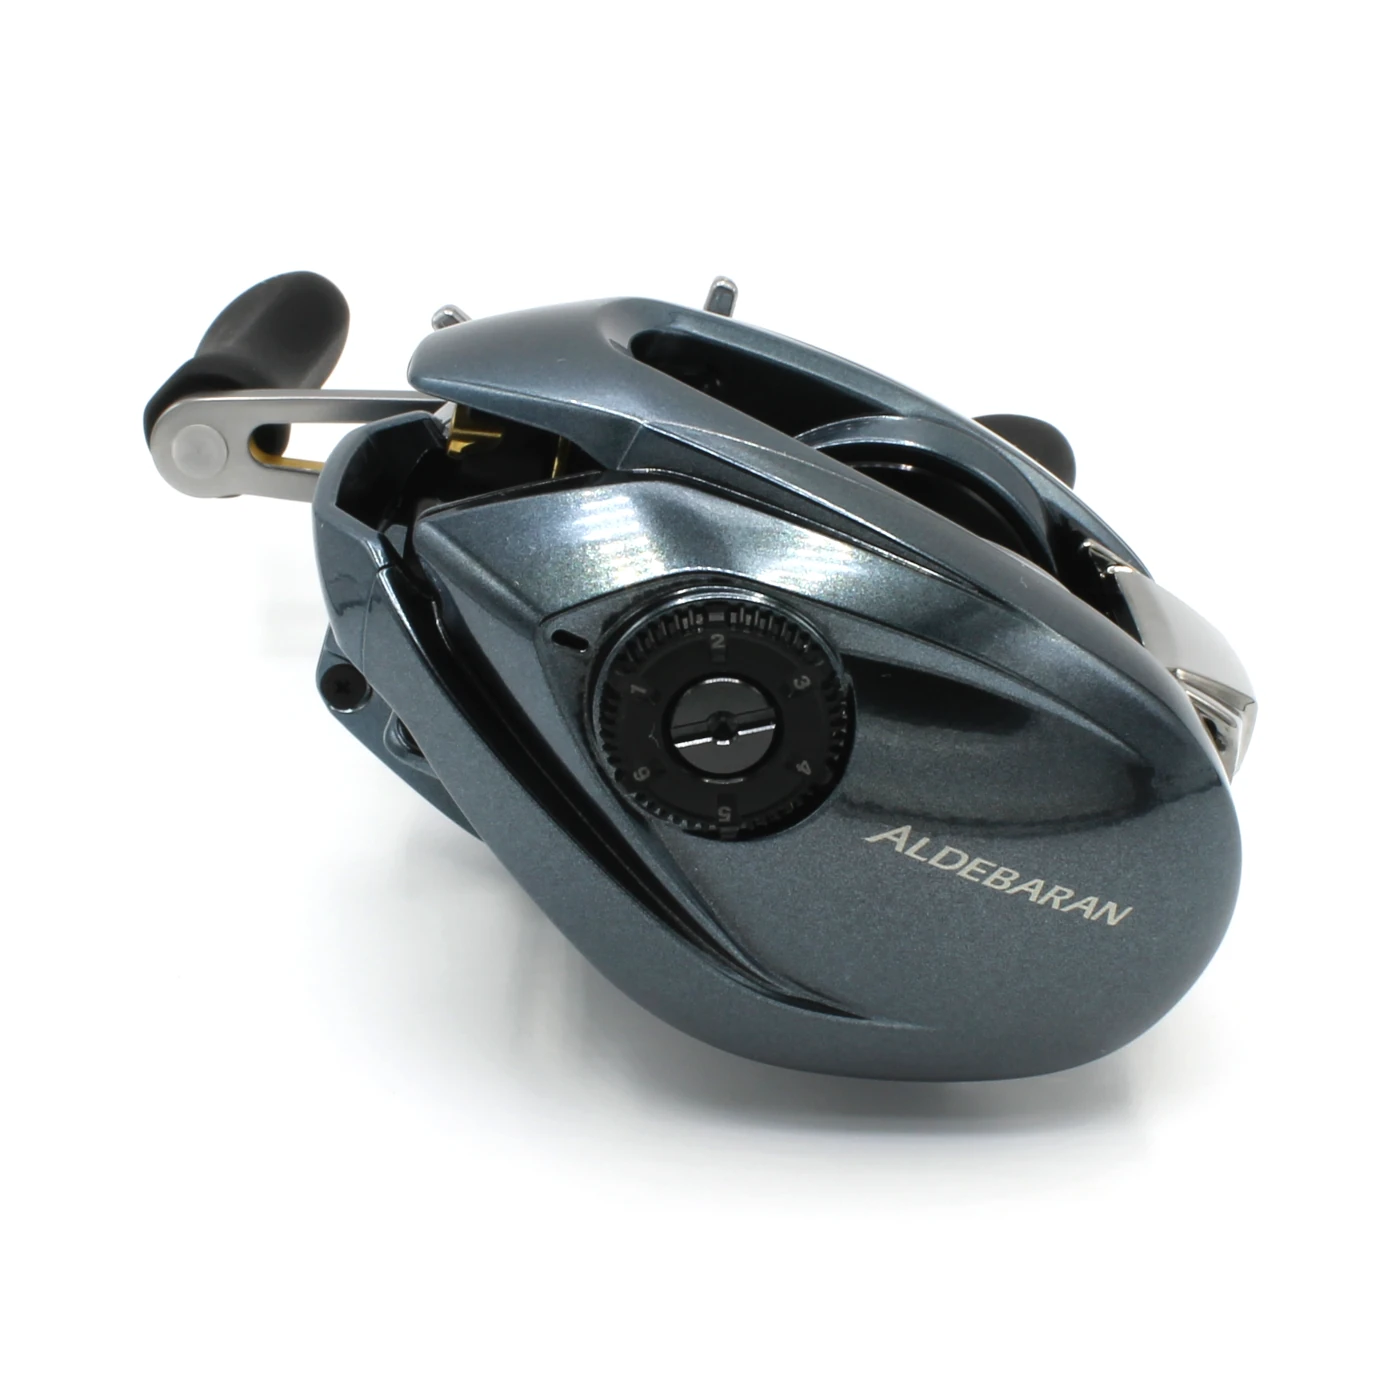 shimano aldebaran bfs - Buy shimano aldebaran bfs at Best Price in Malaysia